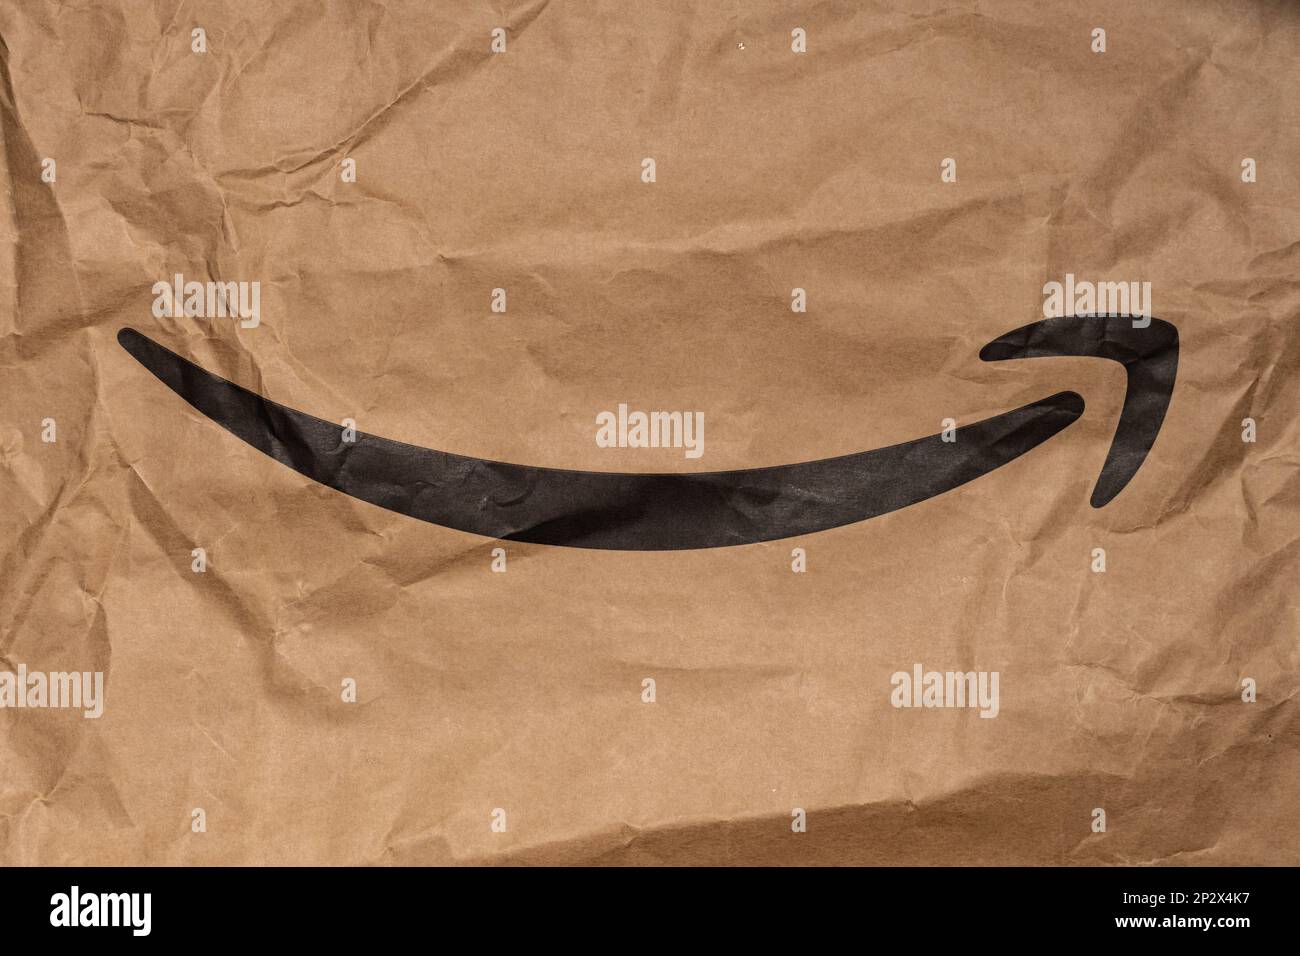 Amazon curved arrow on a packaging. Black smile arrow printed on brown paper. Famous e-commerce logo on a wrinkled background. Stock Photo